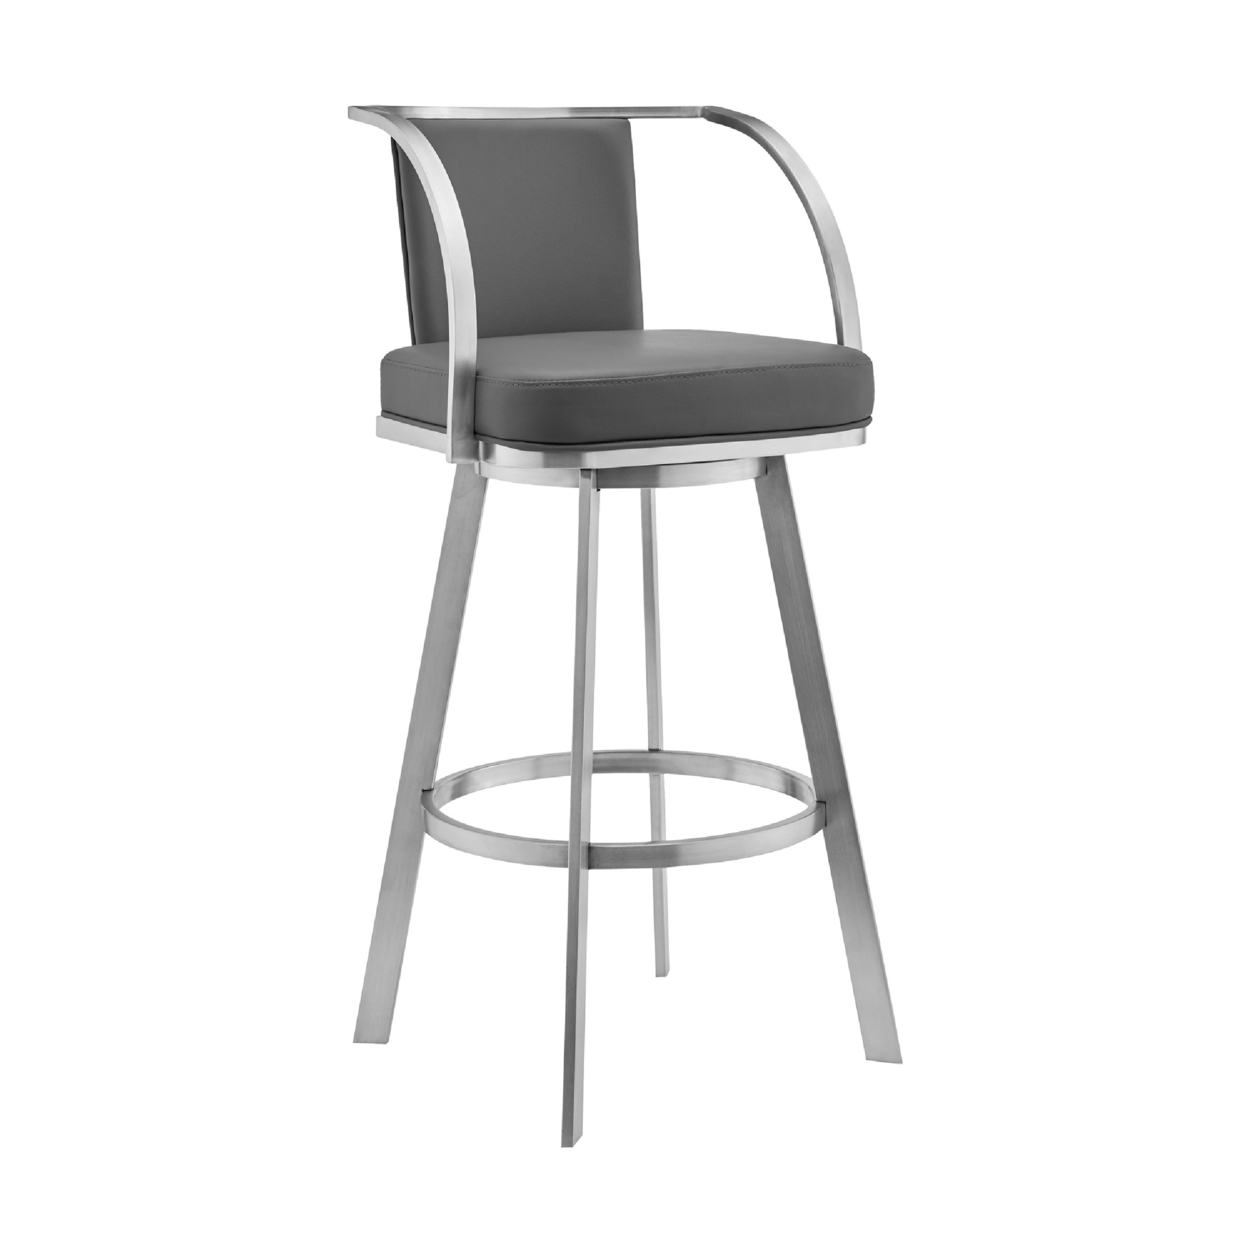 Metal Swivel Barstool With Open Curved Frame Arms, Gray And Silver- Saltoro Sherpi